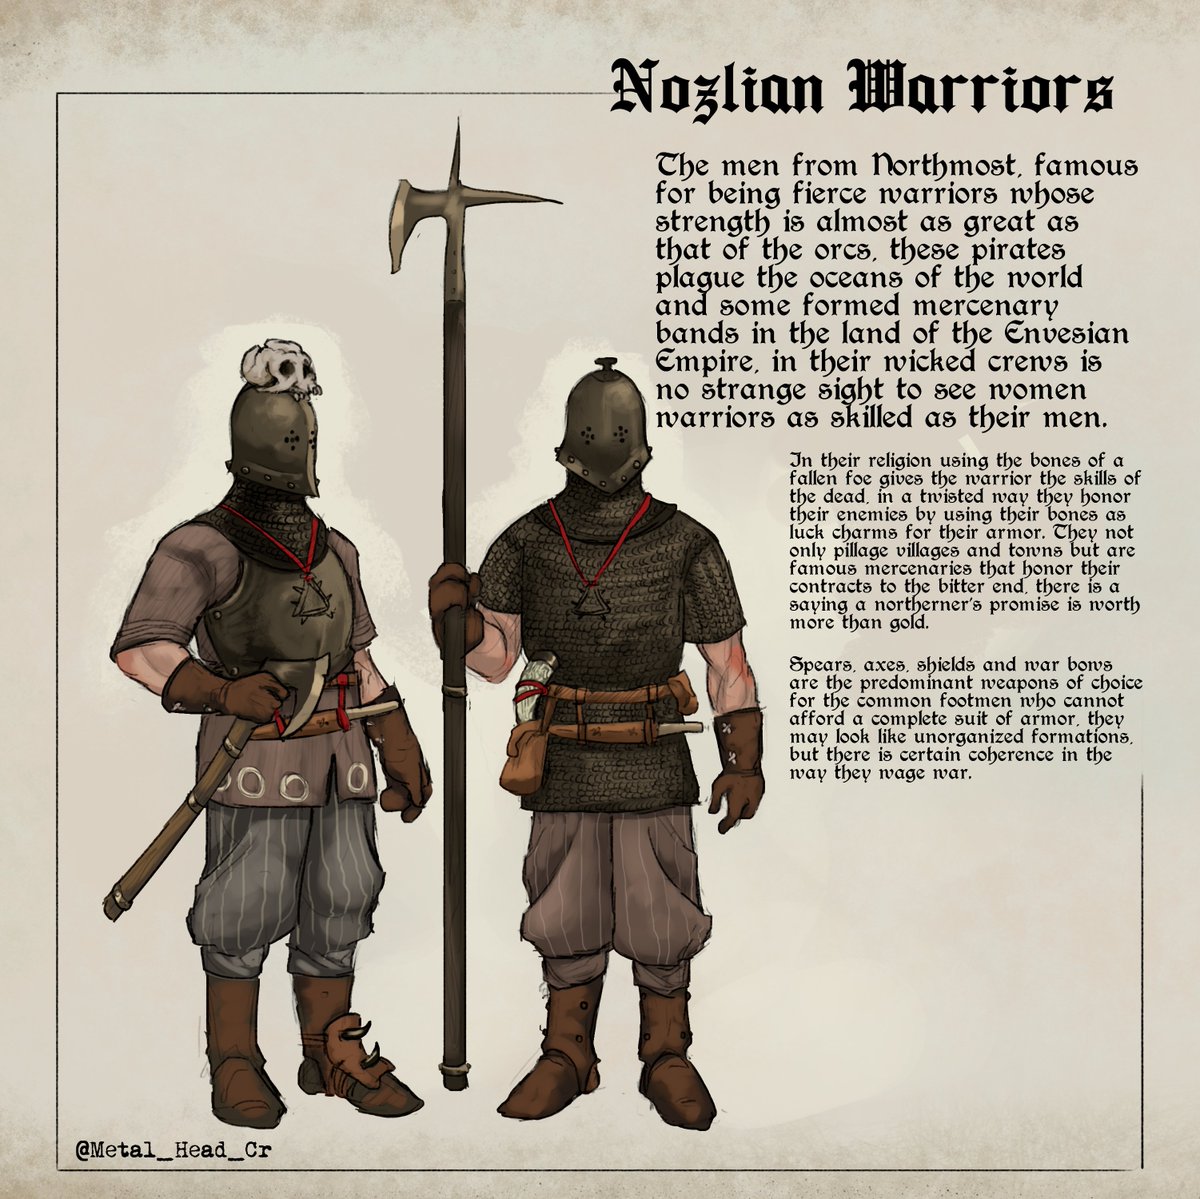 Nozlian pirates plague the world's oceans pillaging and stealing from any land they set a foot on, it is said they worship powerful warlocks who serve under warmonger gods. Aside from their terrible bloodthirst, they are famous for their feasts and revelry.